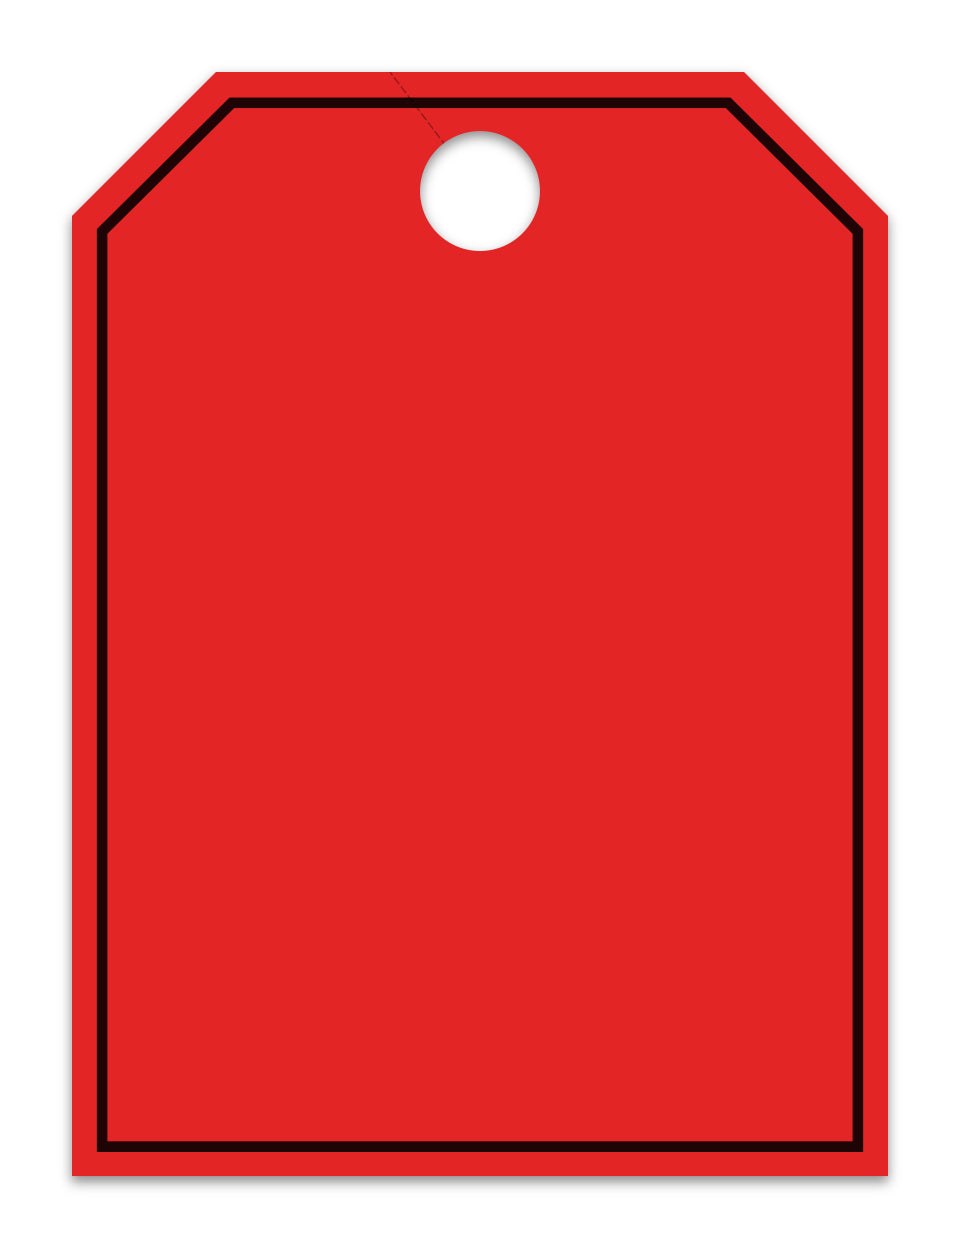 Hang Tags - Blank with Black Frame